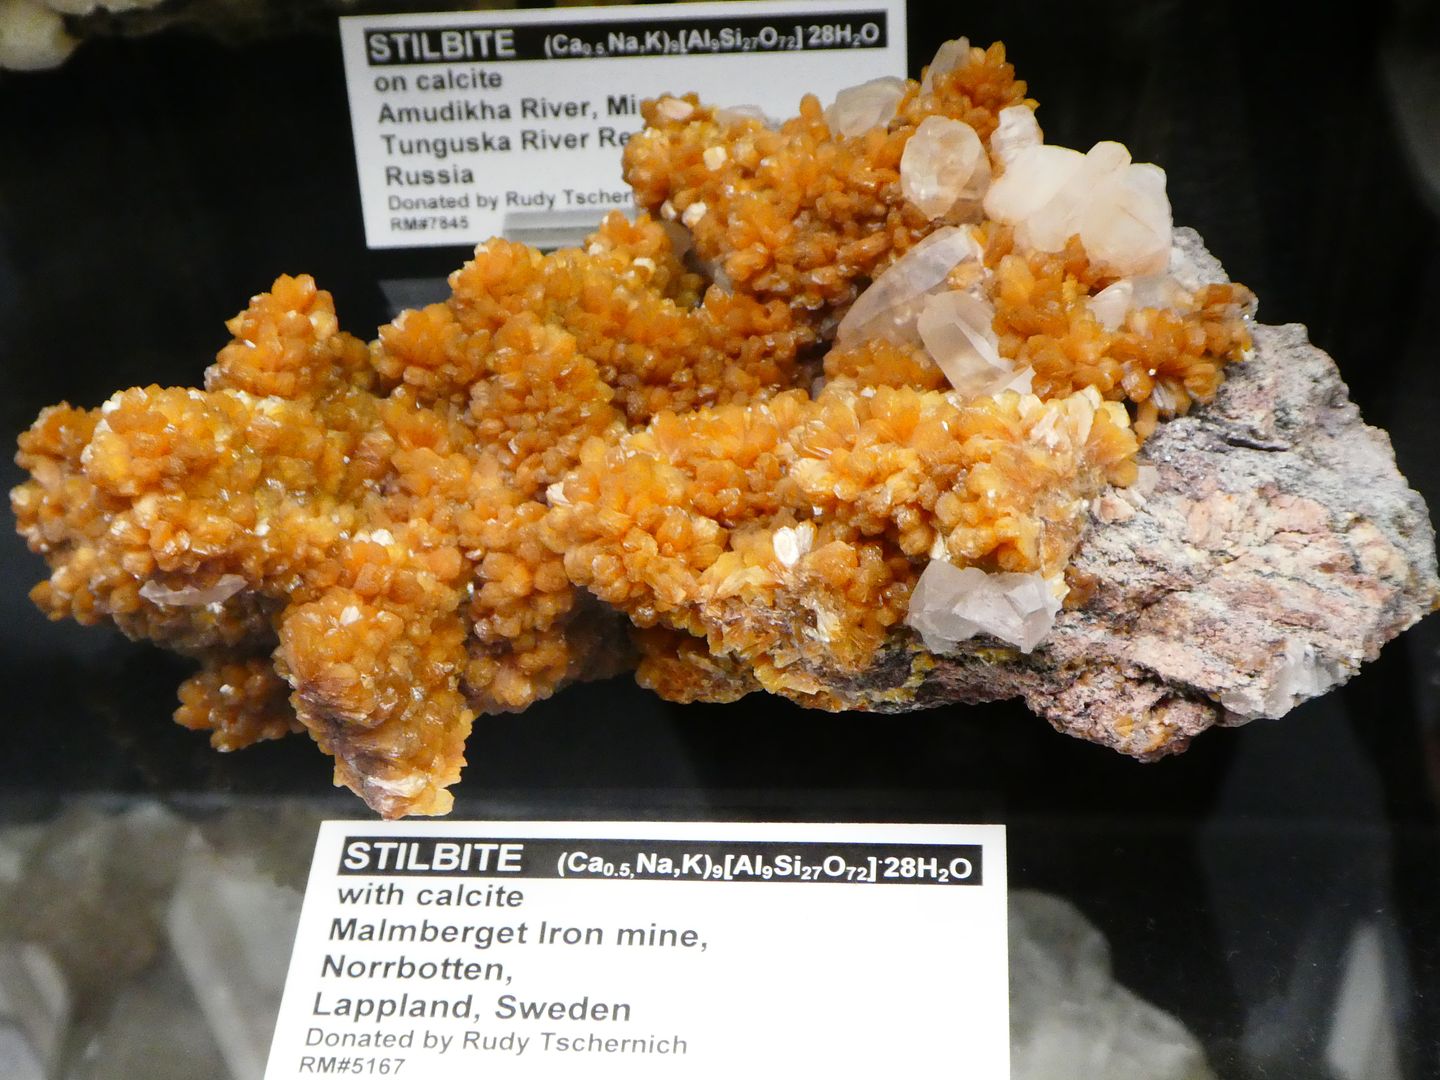 Northwest Mineral Gallery: Some international minerals (photo diary)